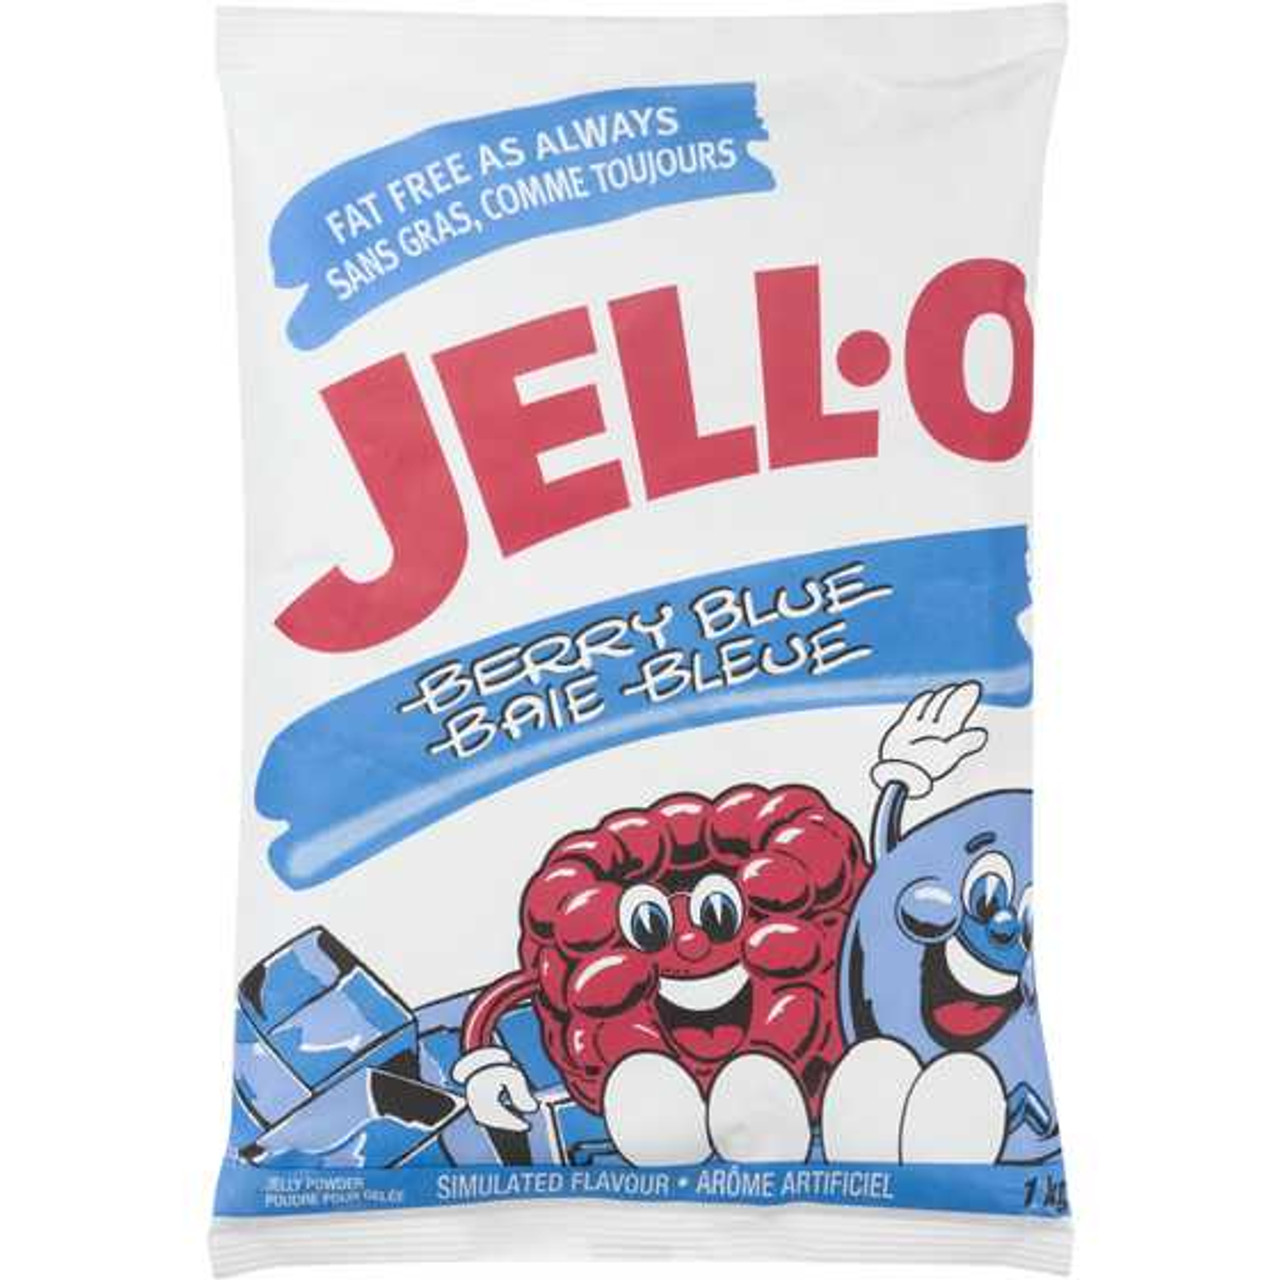 JELL-O Berry Blue 1 kg JELL-O Chicken Pieces